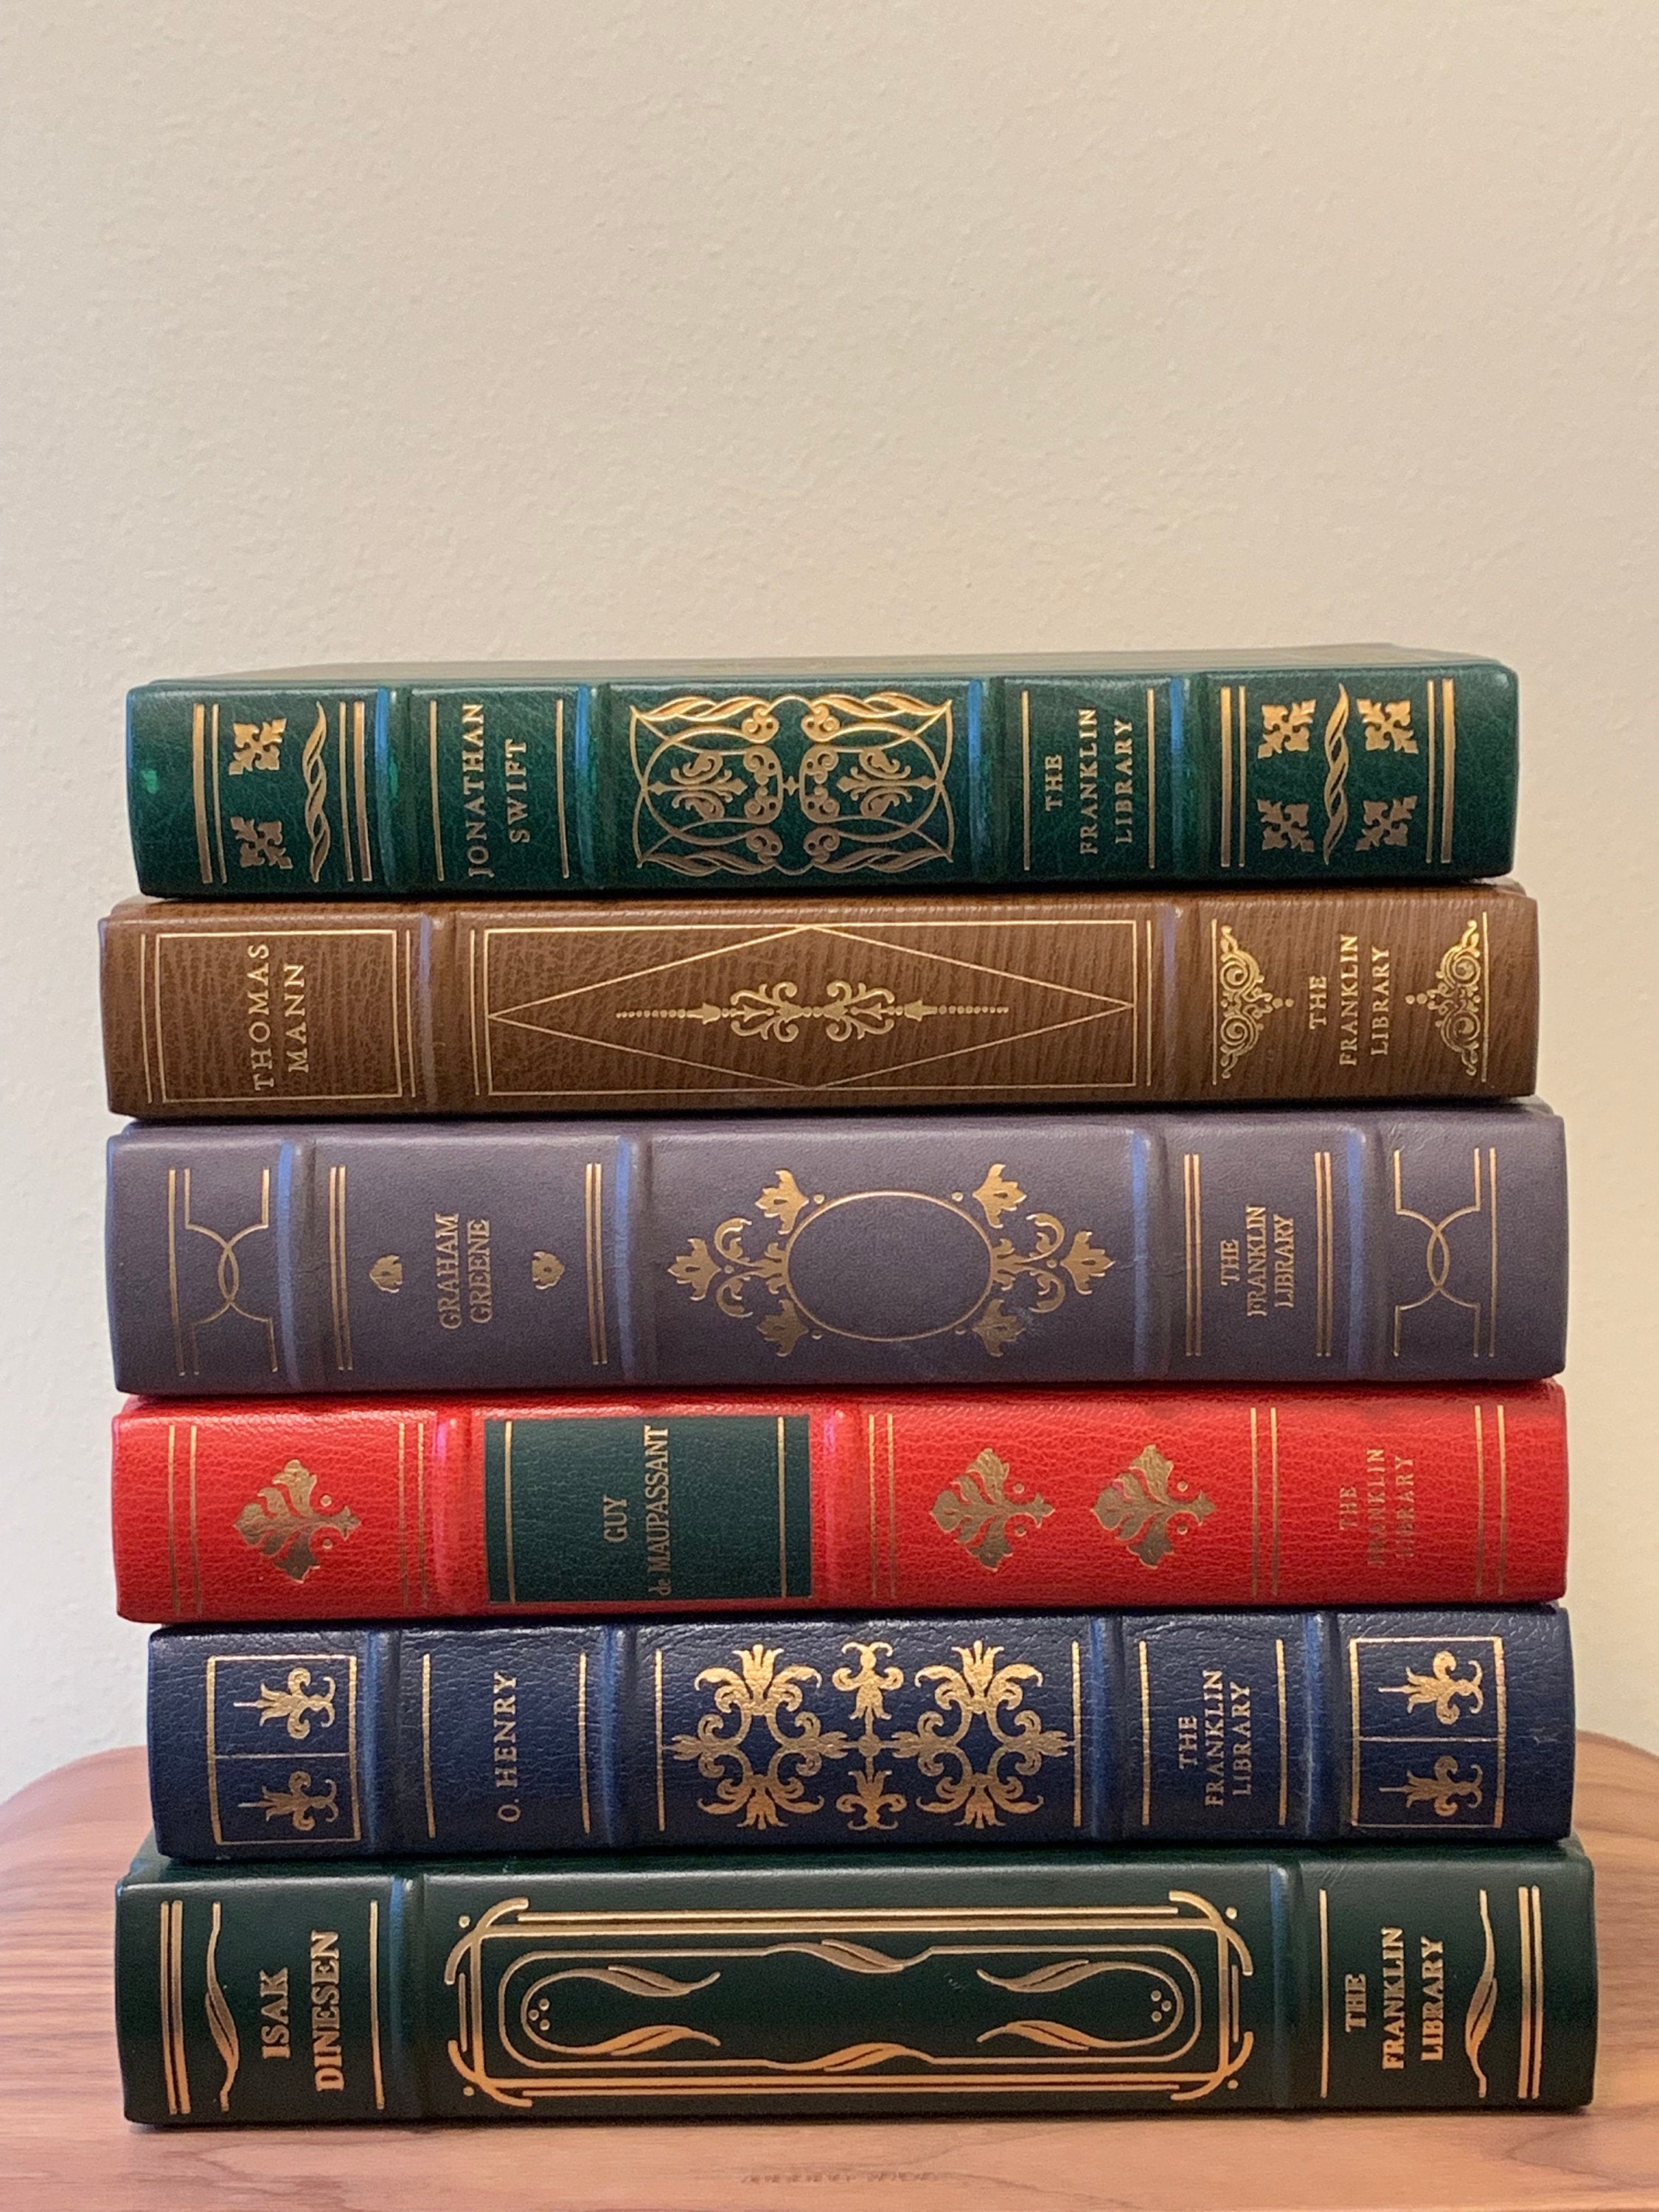 Set of 6 Classic Books The Franklin Library Limited Edition Titles from the Collected Stories of the World's Greatest Writers Series